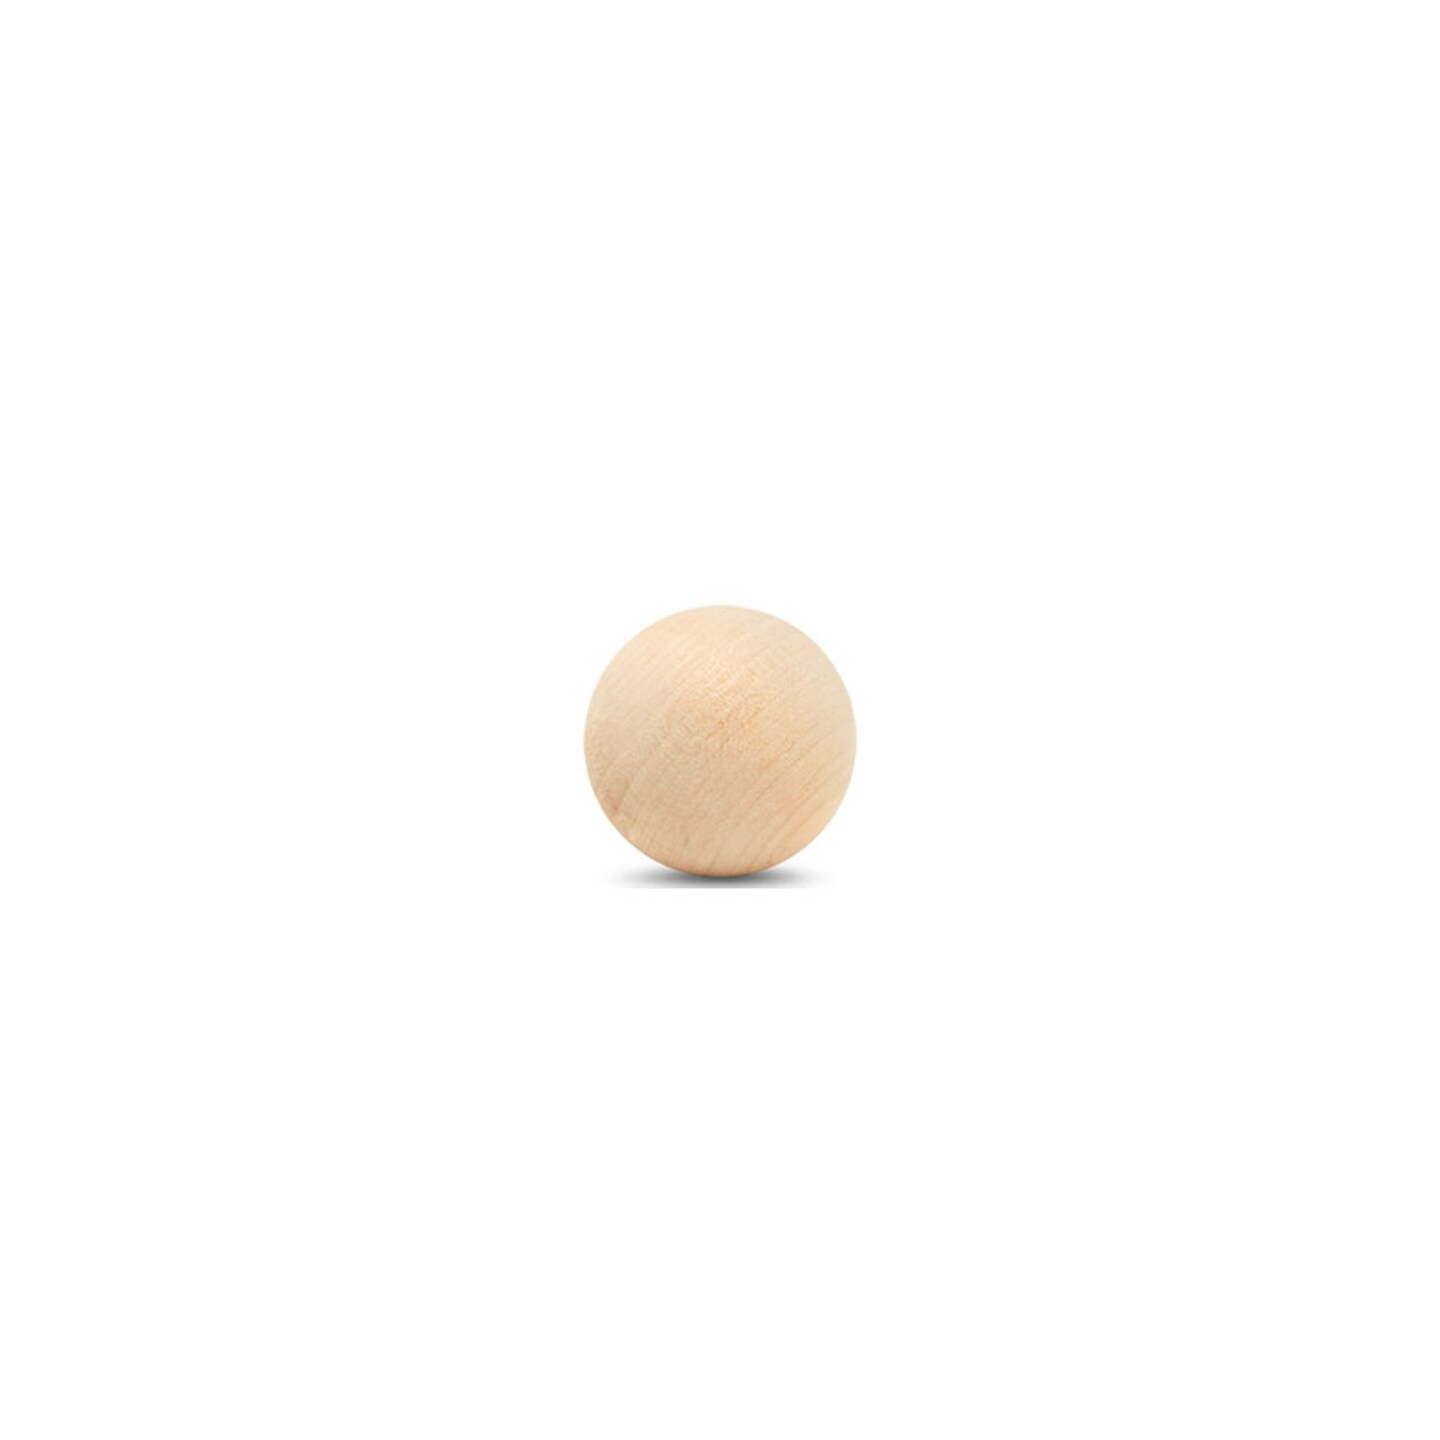 2-1/4 Inch Small Wood Balls, Pack of 3 Wooden Balls for Crafts and DIY  Project, Hardwood Birch Wood Balls, by Woodpeckers 